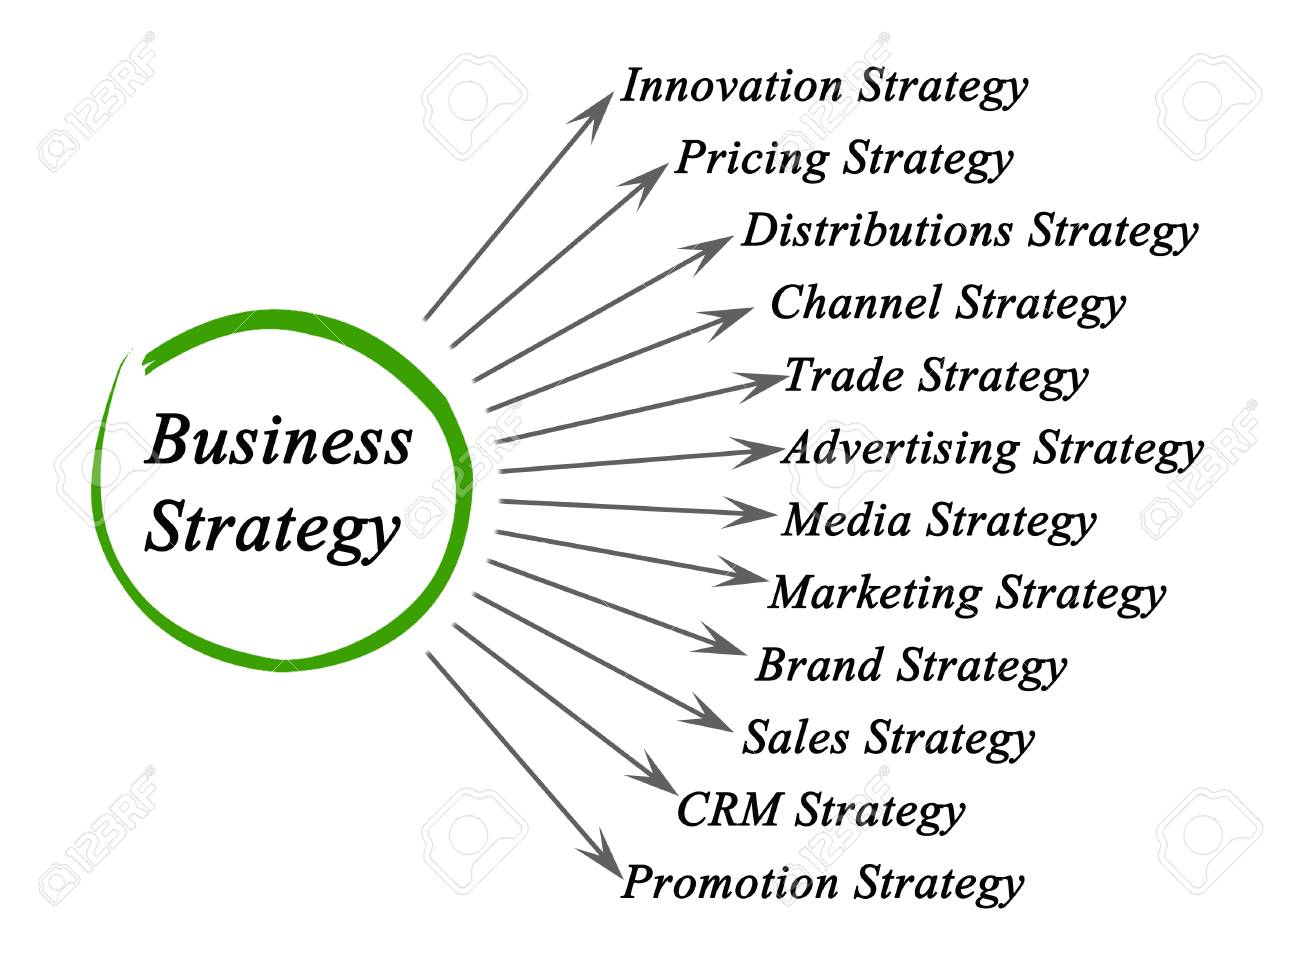 outline of a strategic business plan